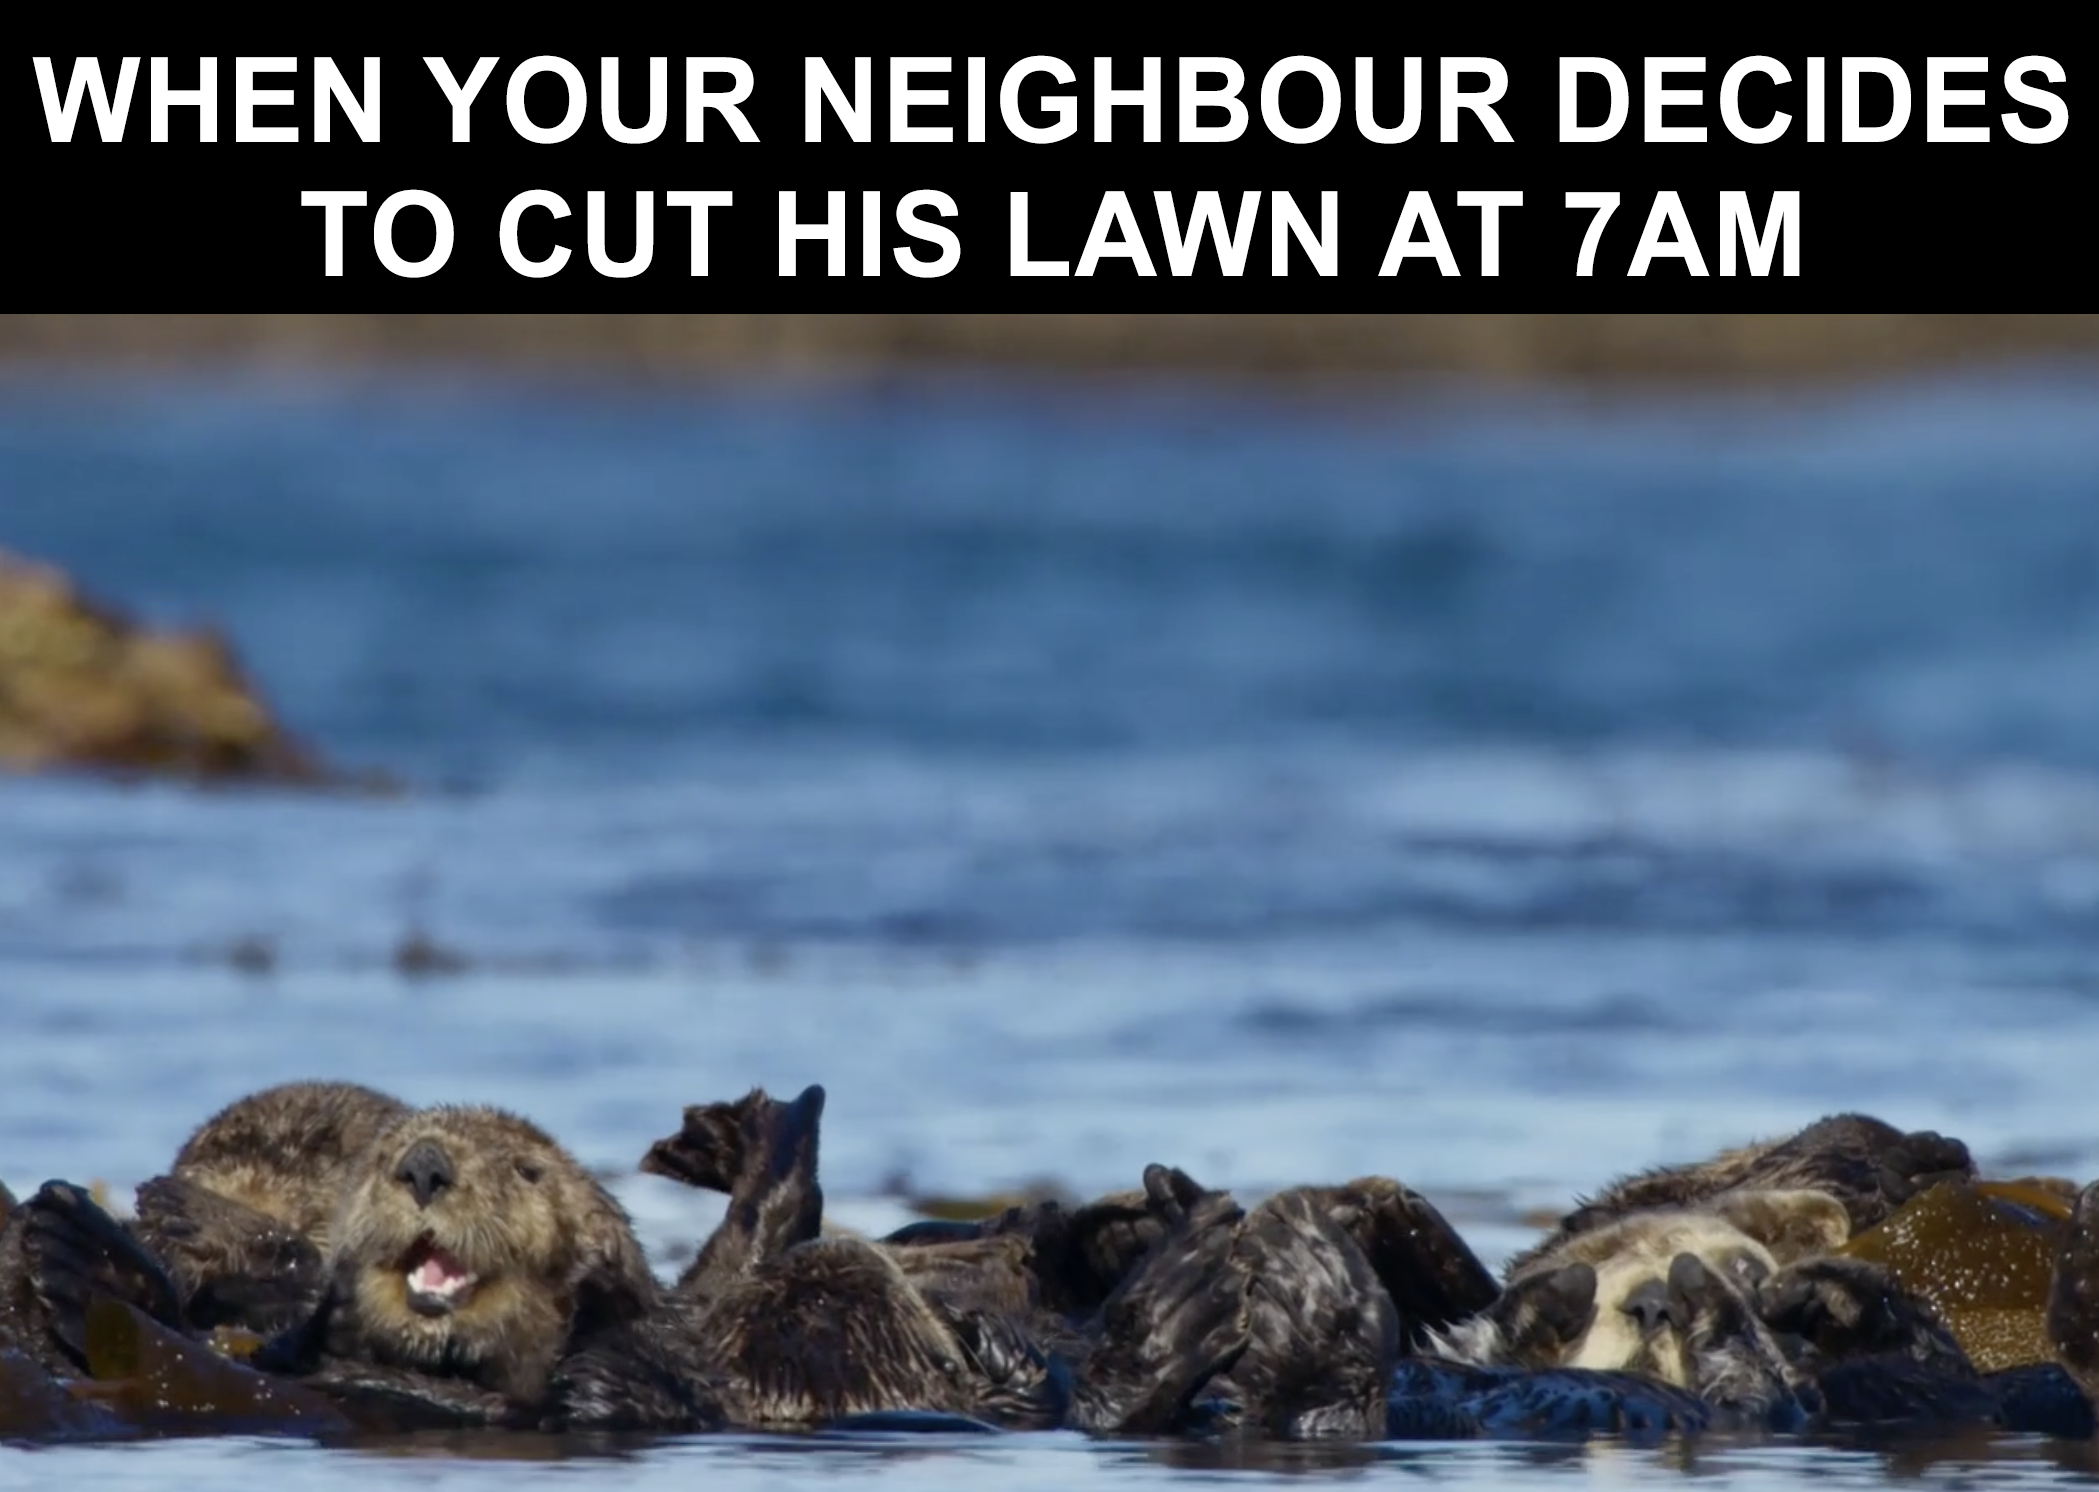 Just 12 relatable memes from Blue Planet II | JOE.co.uk